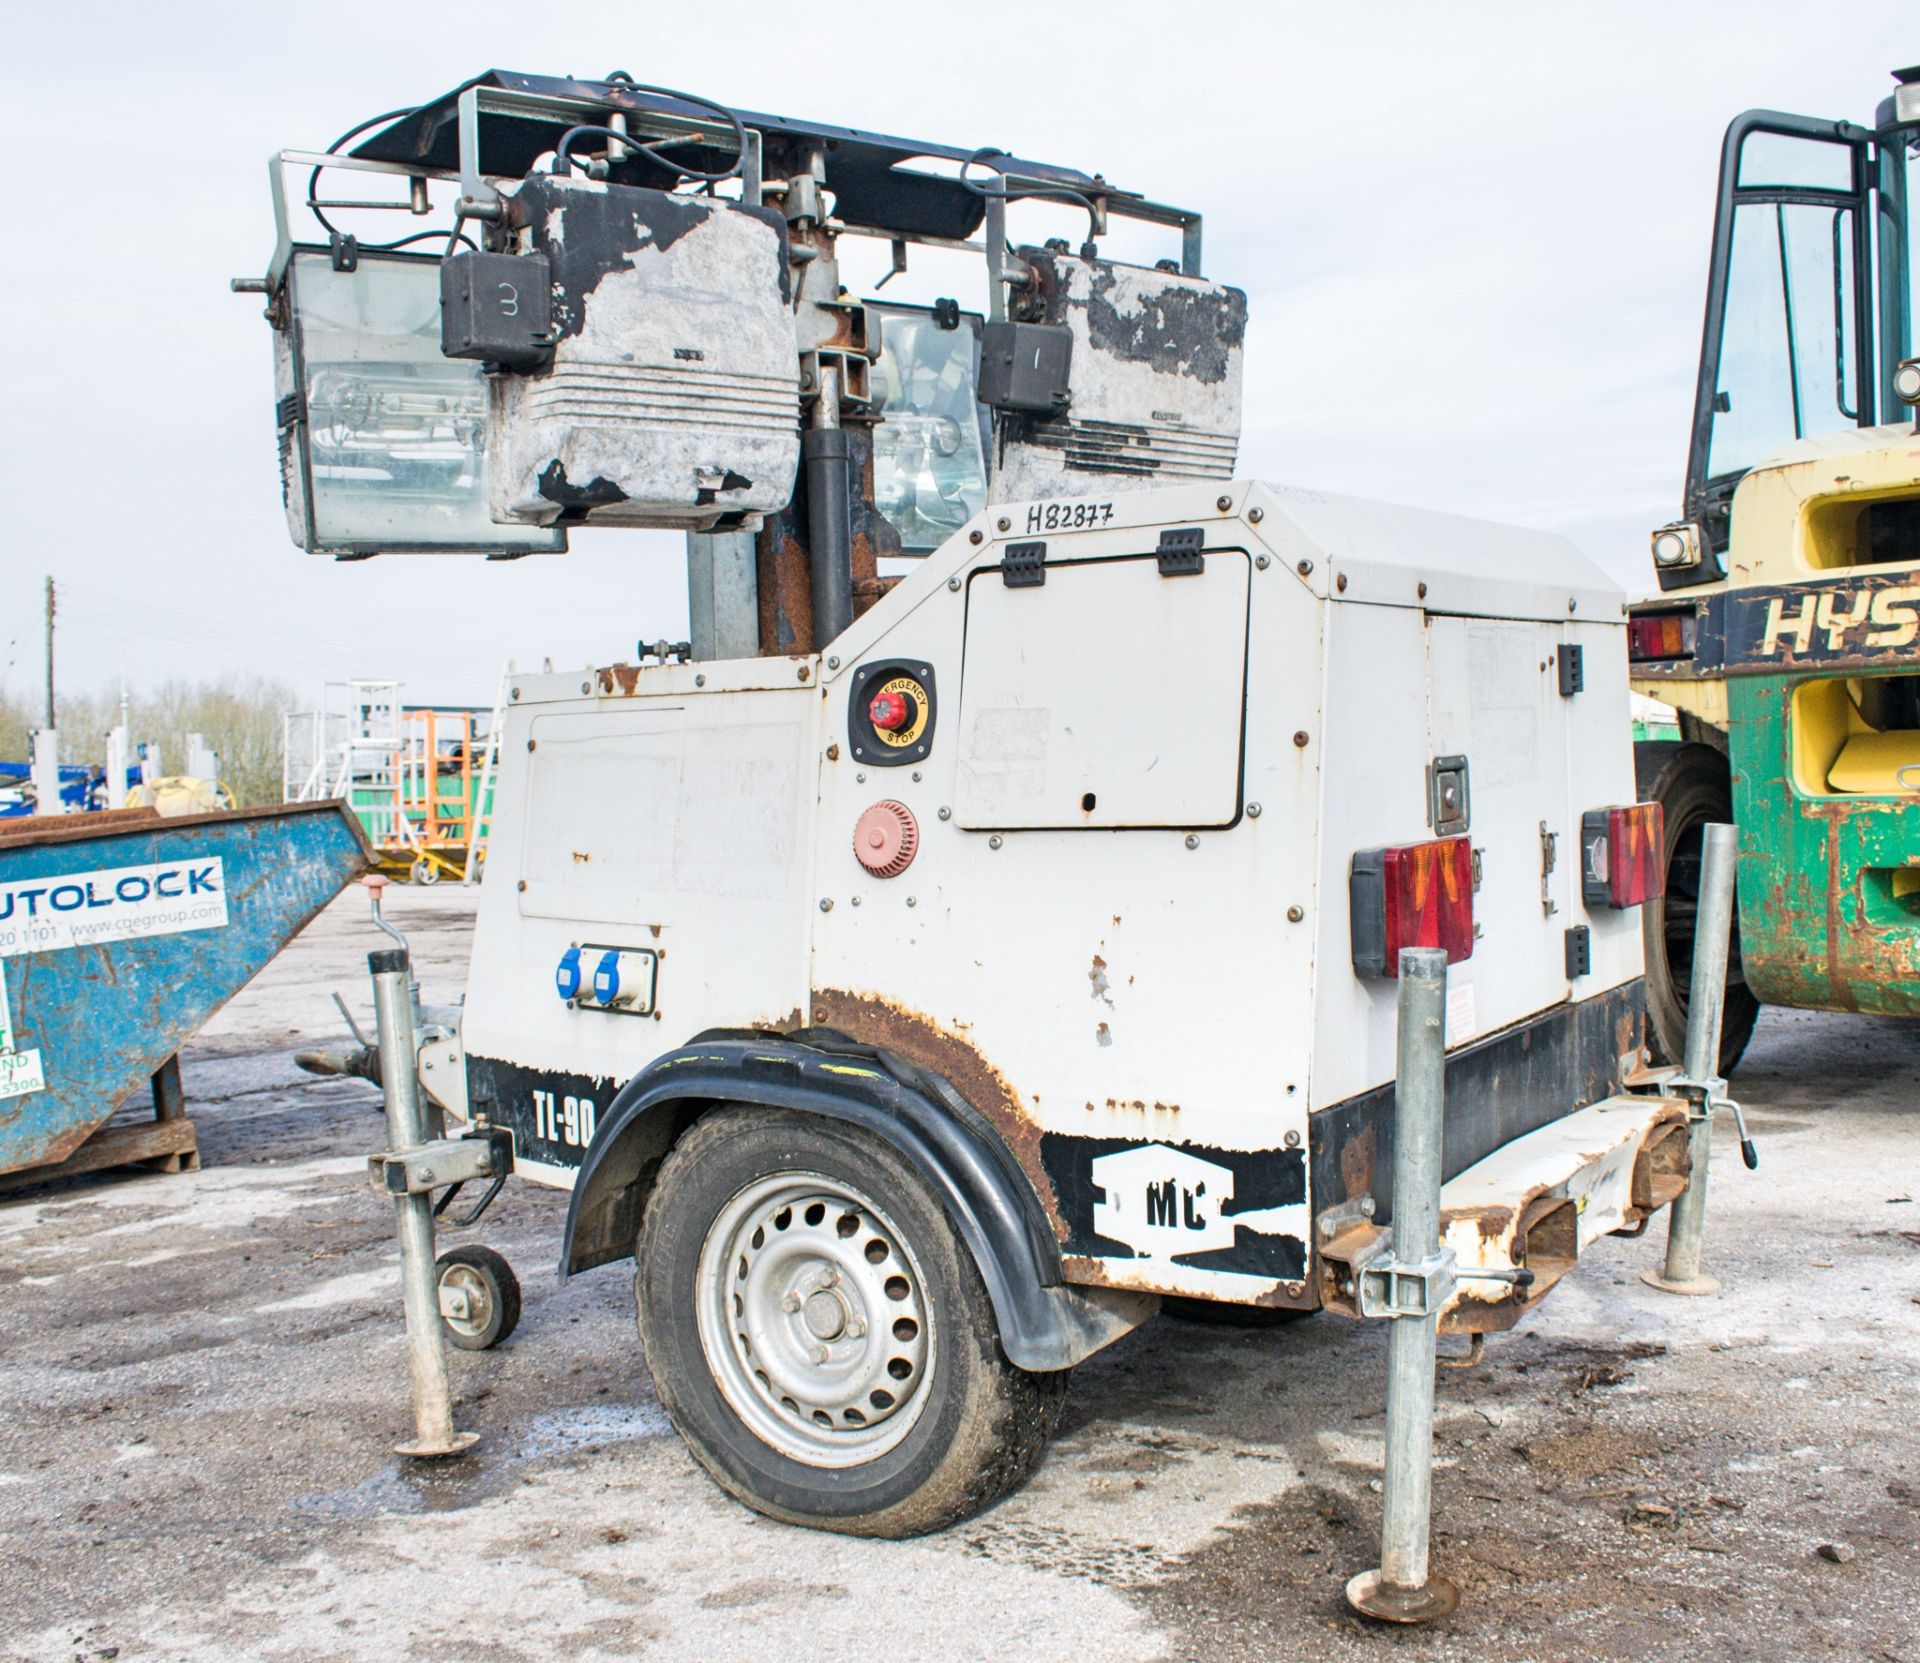 SMC TL-90 diesel driven mobile lighting tower Year: 2008 S/N: 87942 Recorded Hours: H82877 - Image 3 of 9